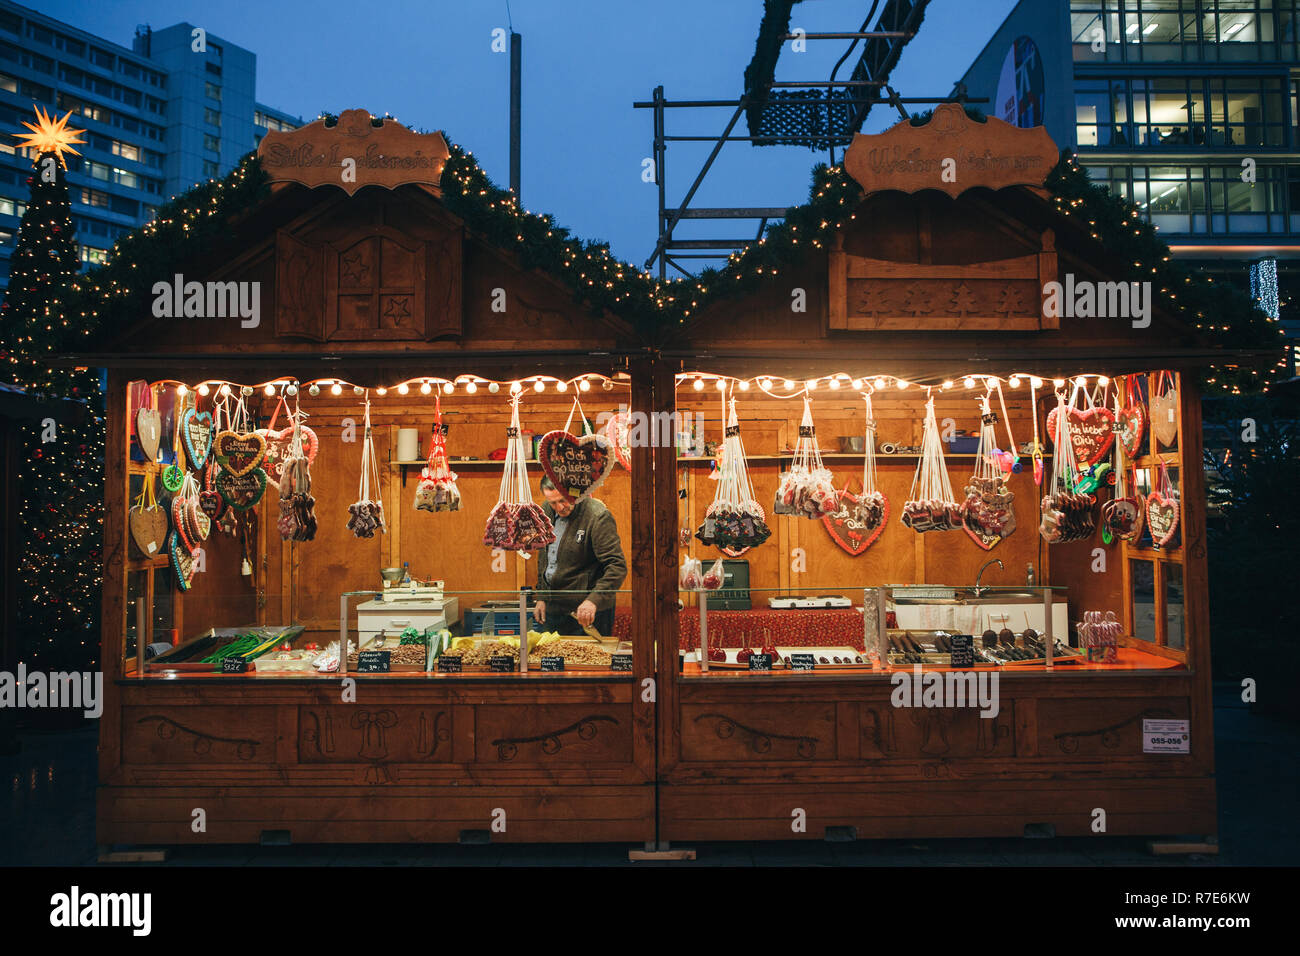 Berlin, December 25, 2017: Selling sweets and traditional gingerbread in the evening at the Christmas market in Berlin. Decorated stall. Stock Photo